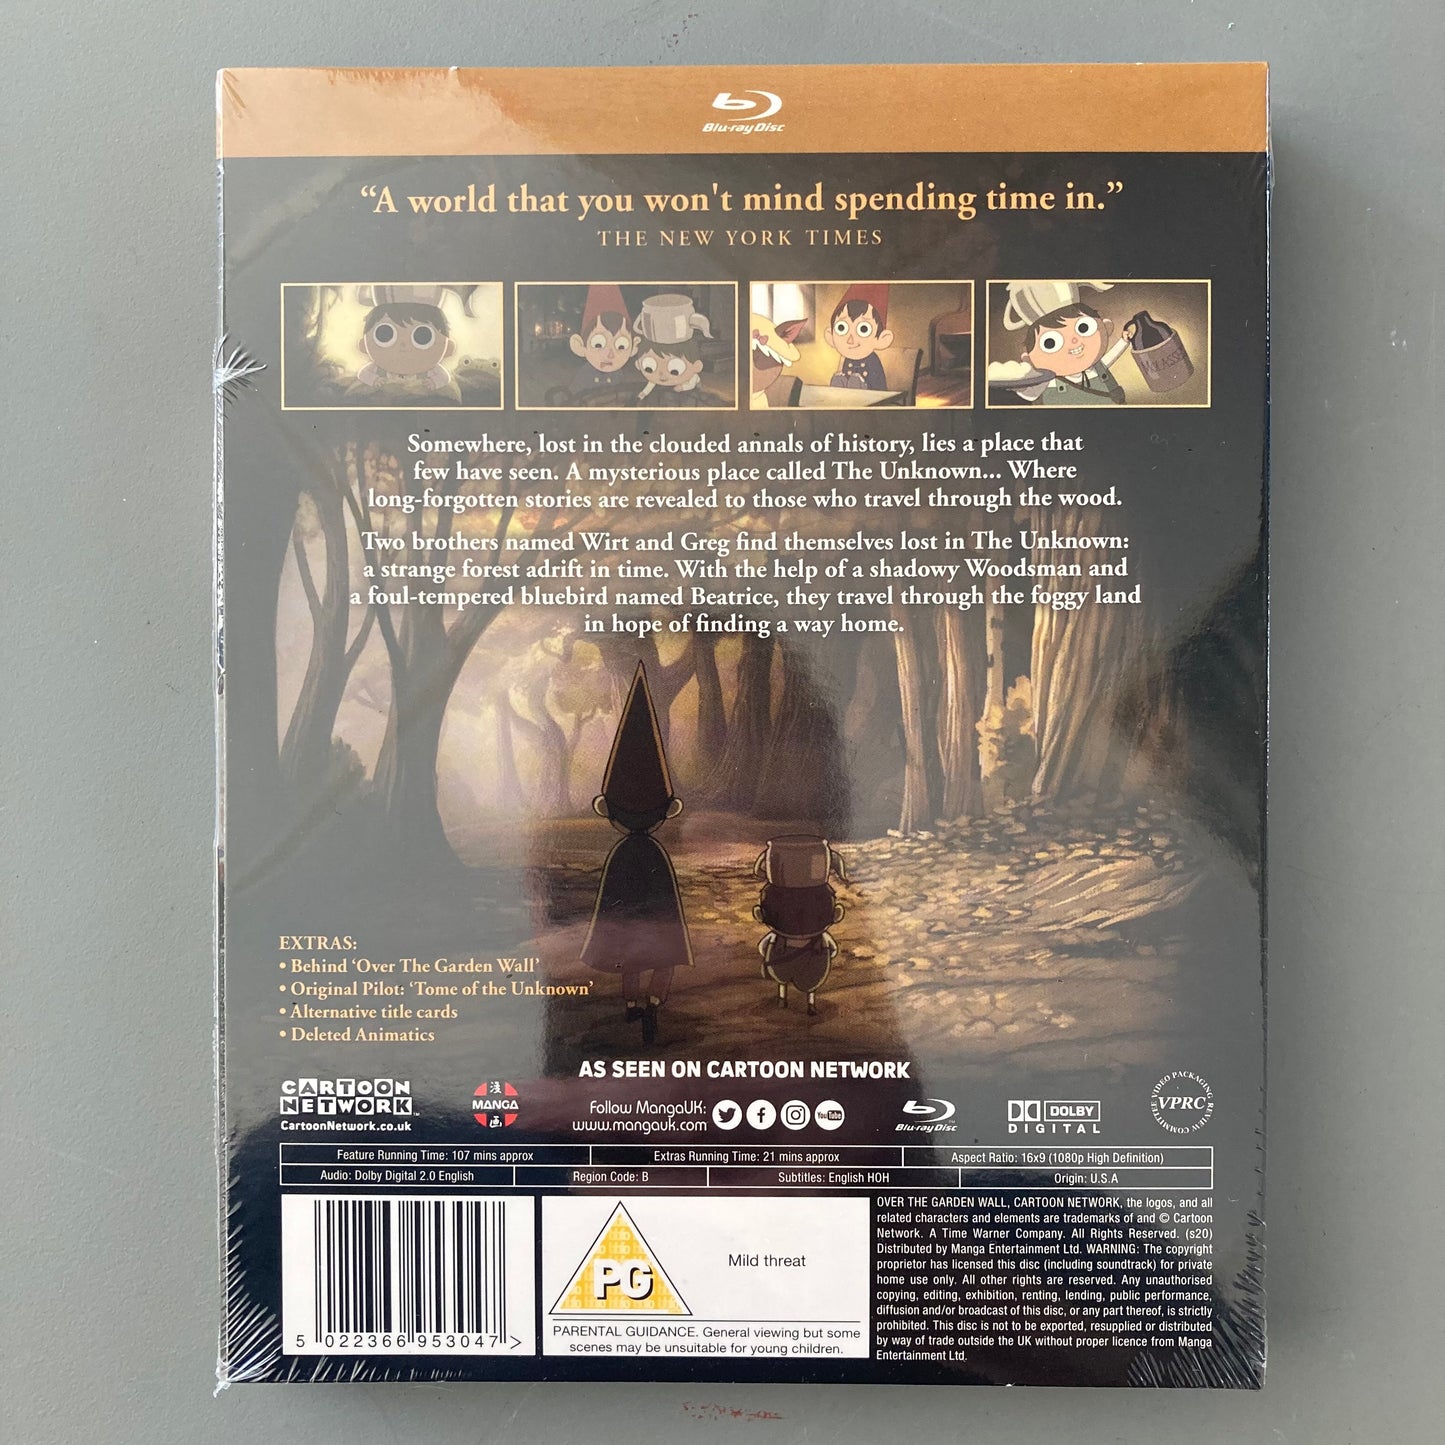 Over the Garden Wall (Blu-ray)